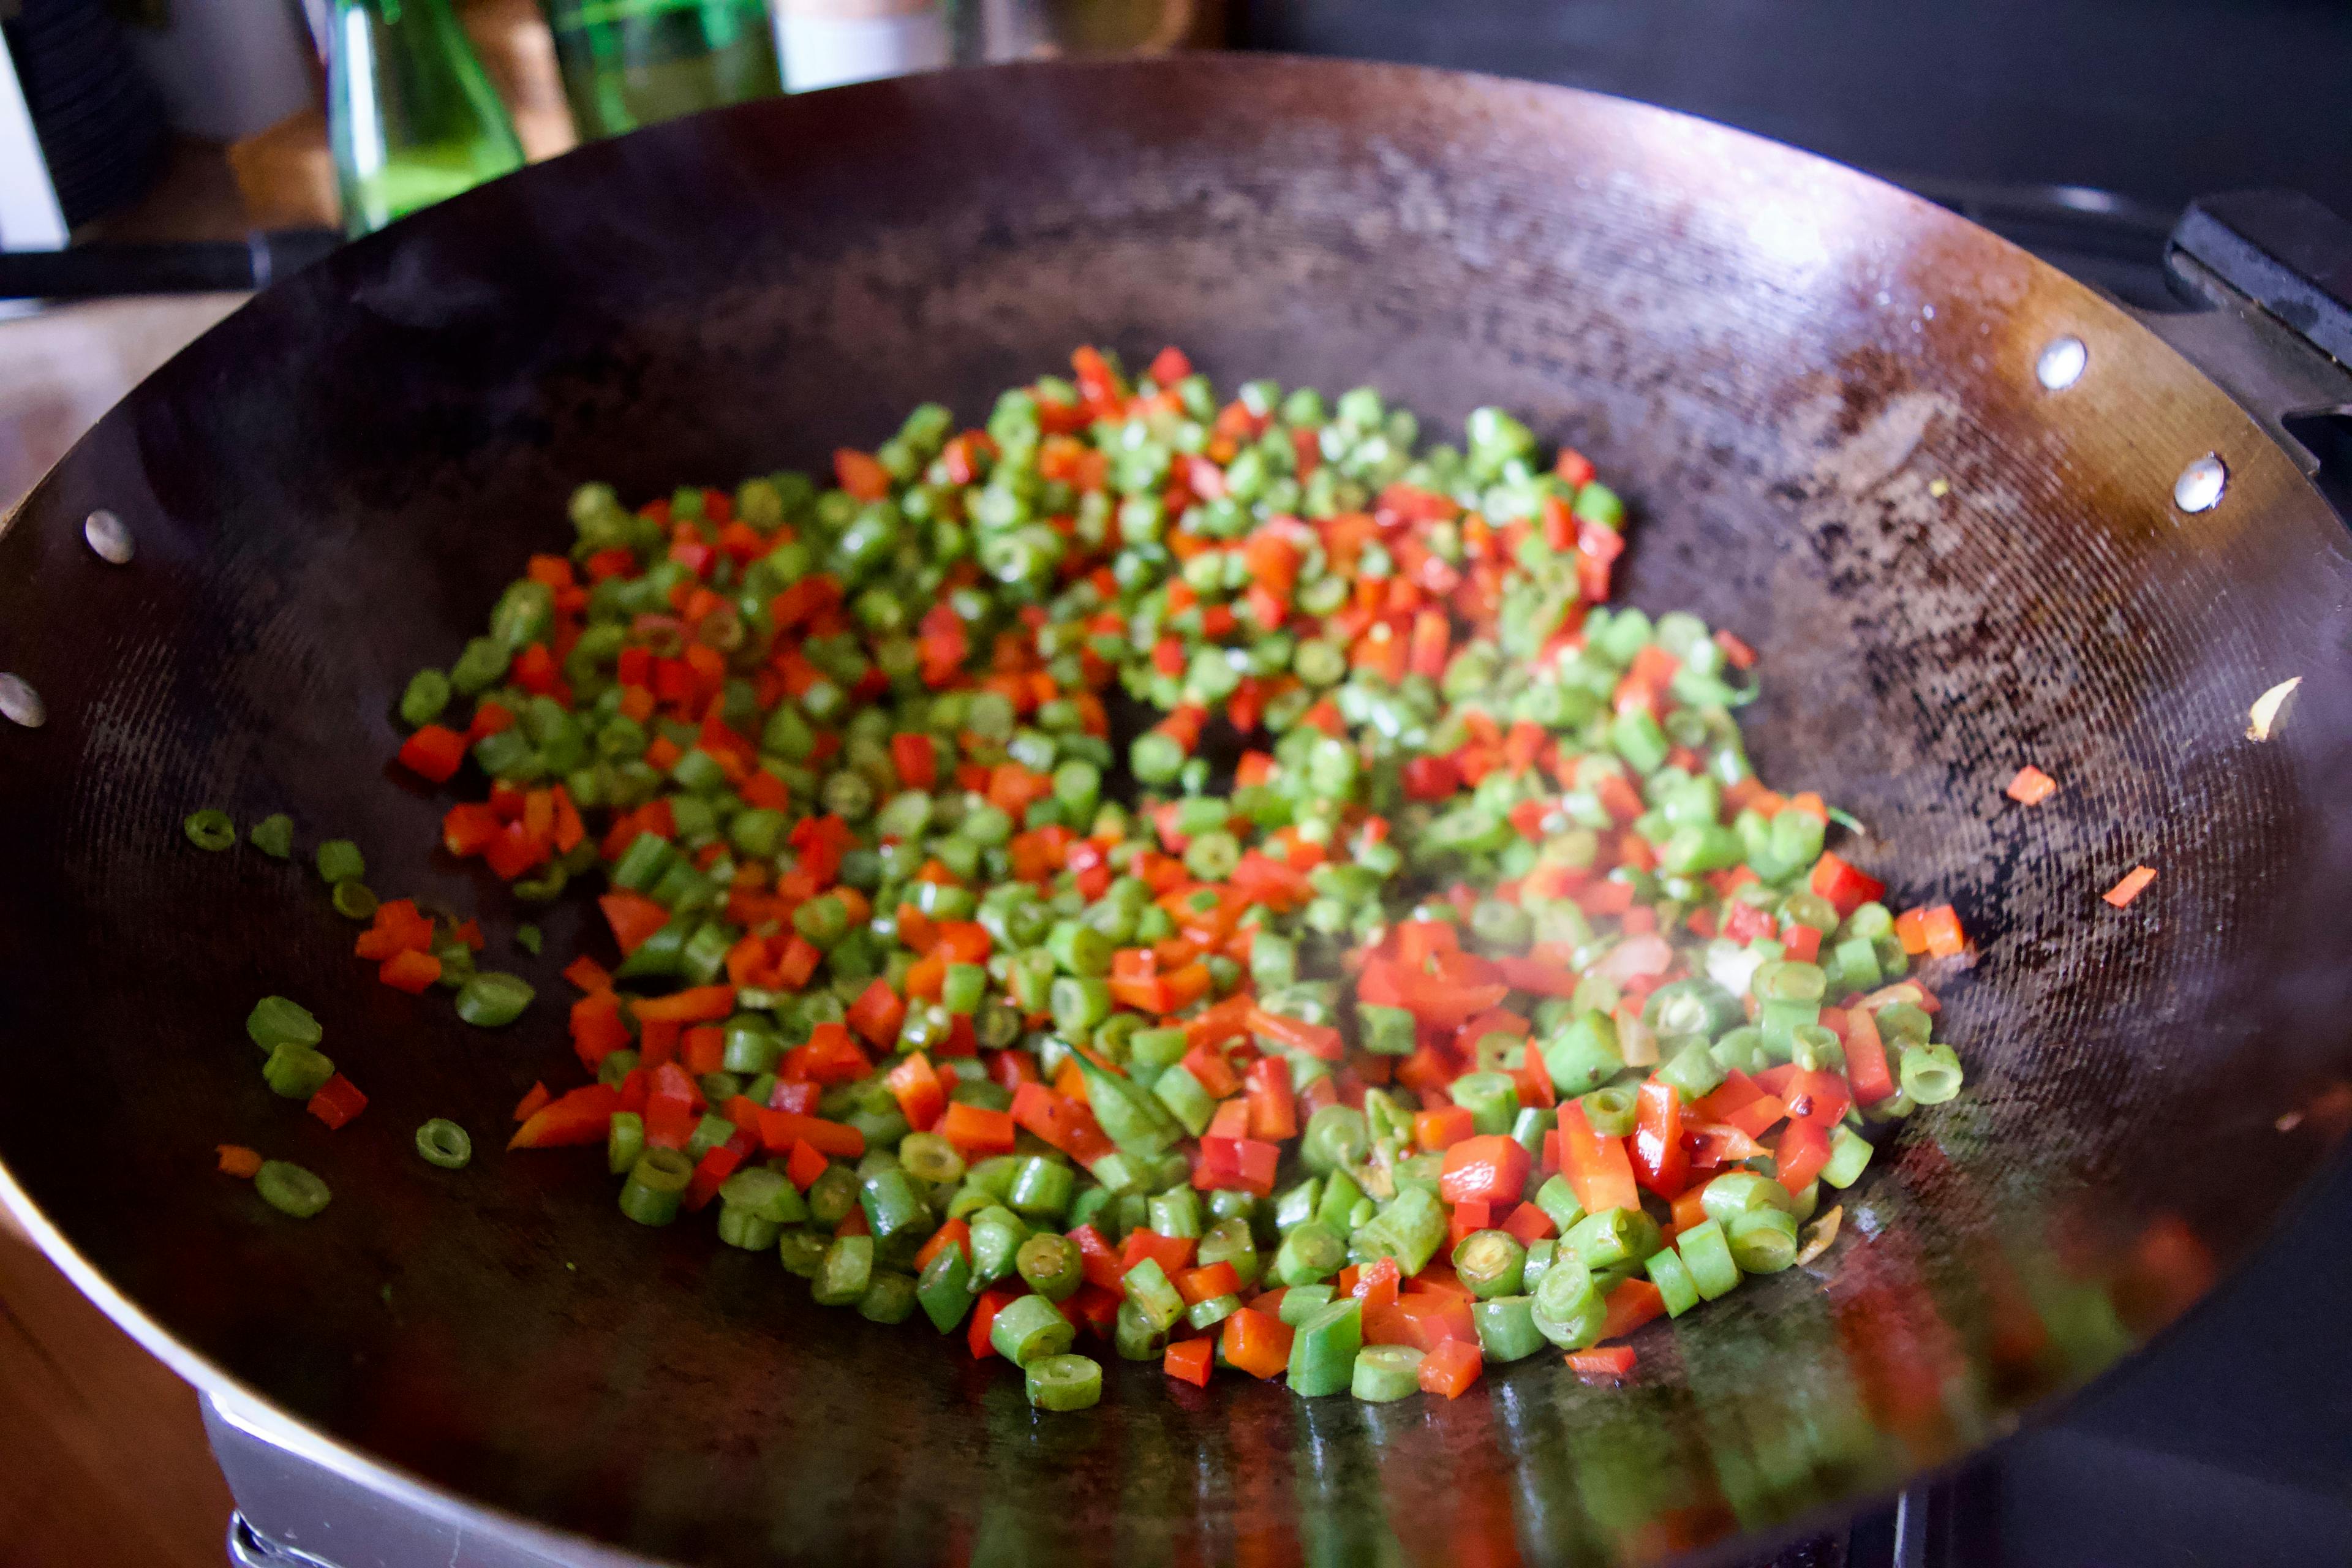 Red pepper and green beans cooking in a wok.